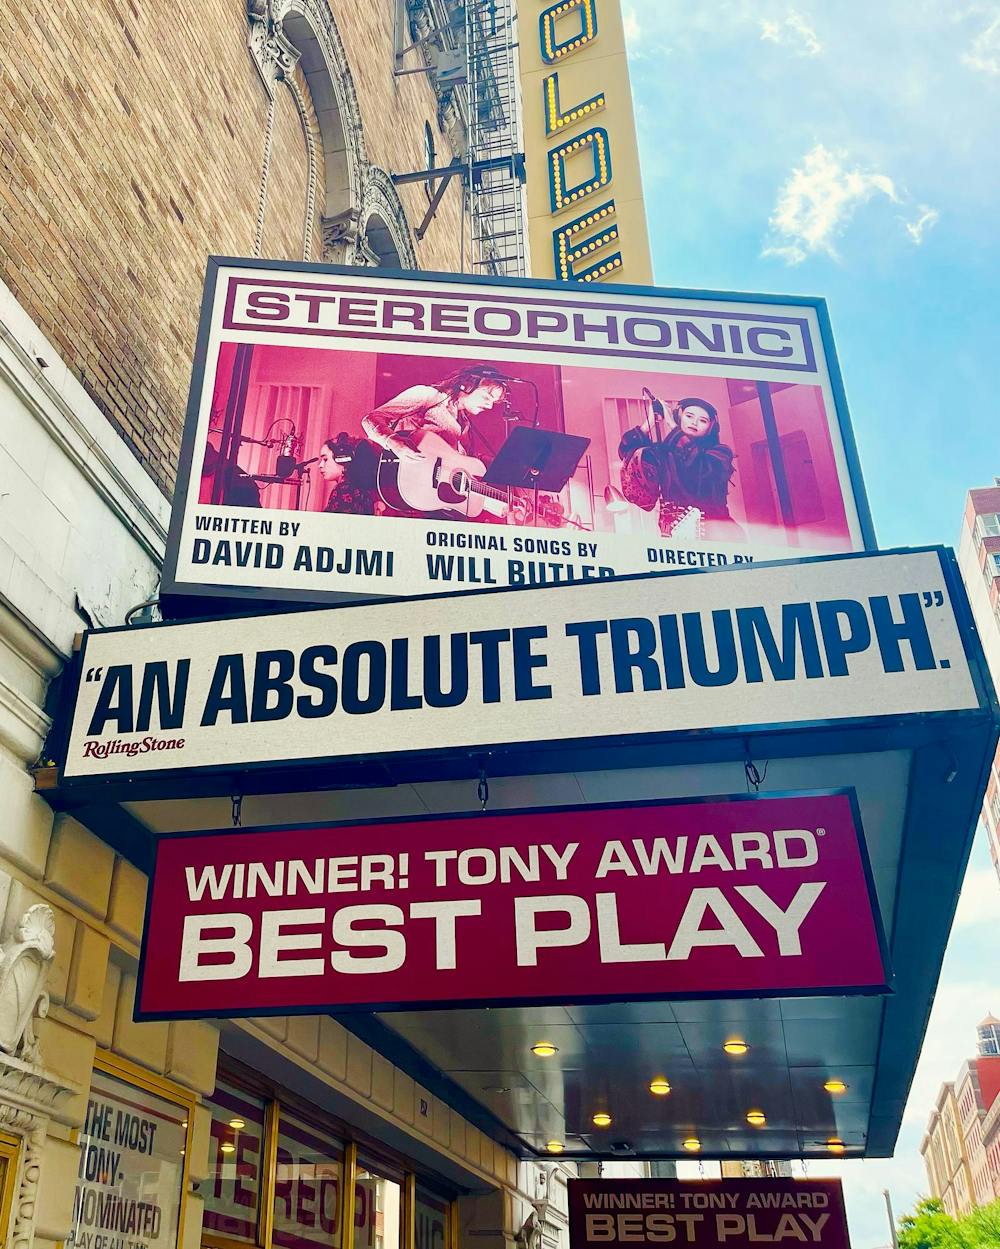 "Stereophonic" is playing on Broadway and was nominated for 13 Tony Awards, winning 5.